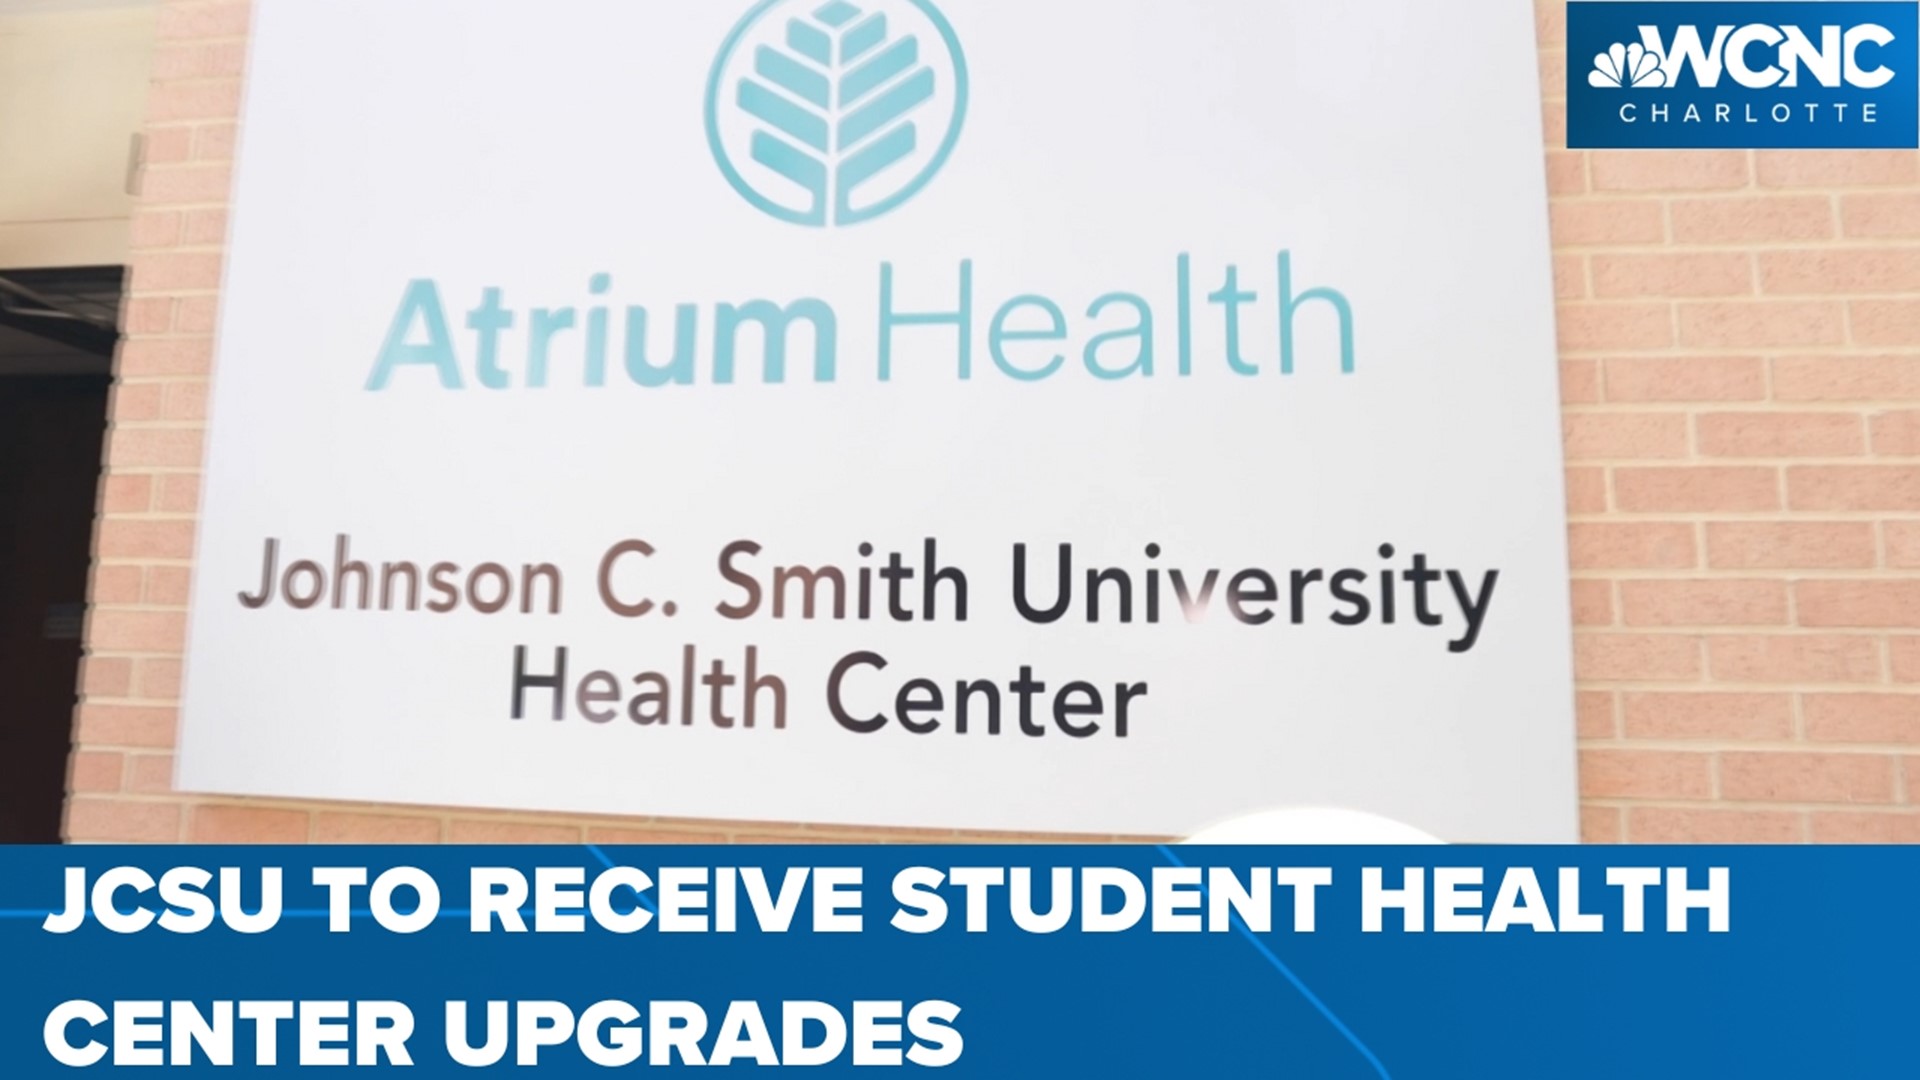 Johnson C. Smith University is teaming up with Atrium Health to make improvements on its on-campus health center.